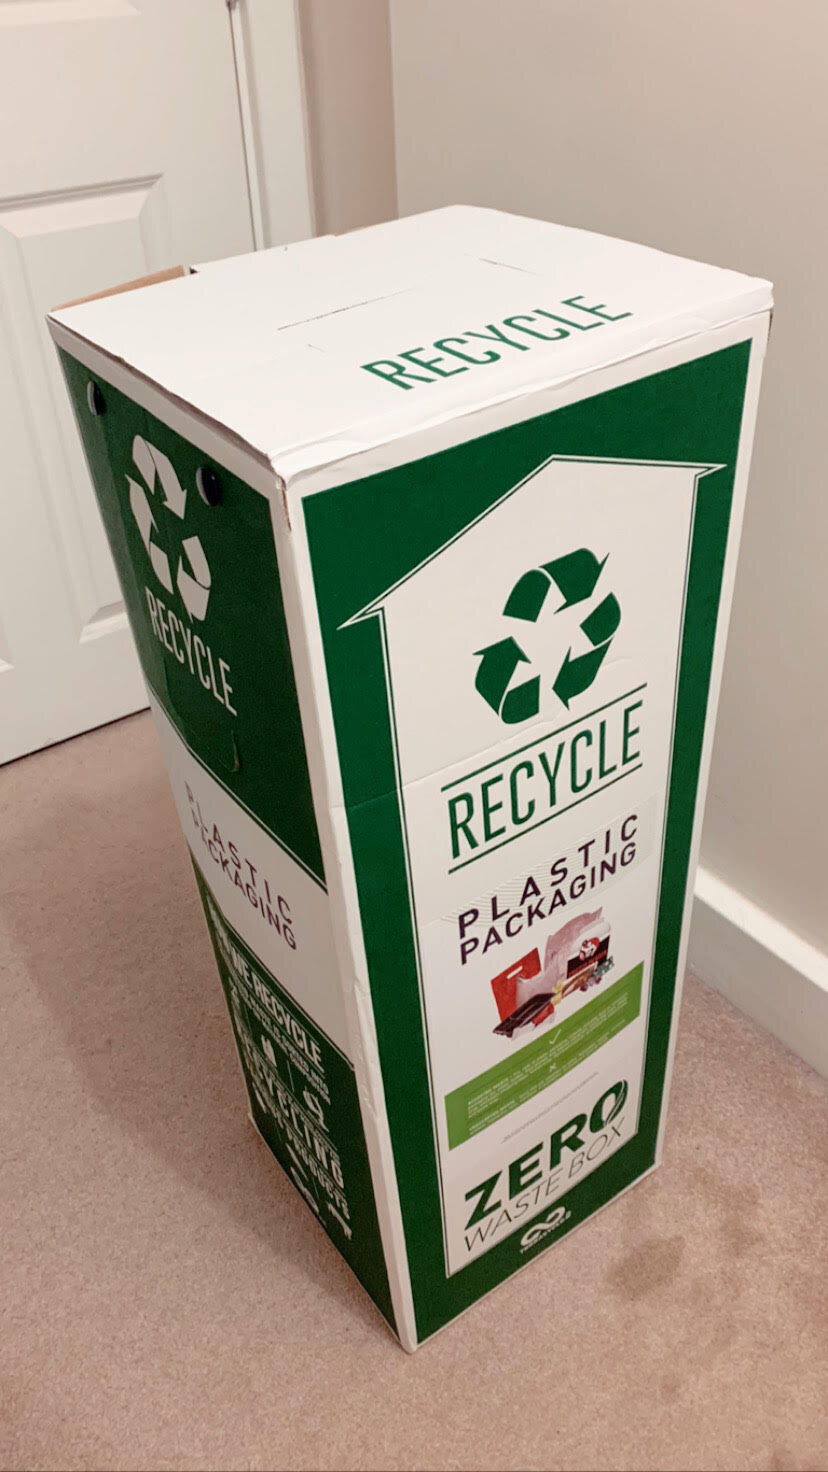 29. Recycle your 'non-recyclable' plastic waste with a Terracycle Zero-Waste Box